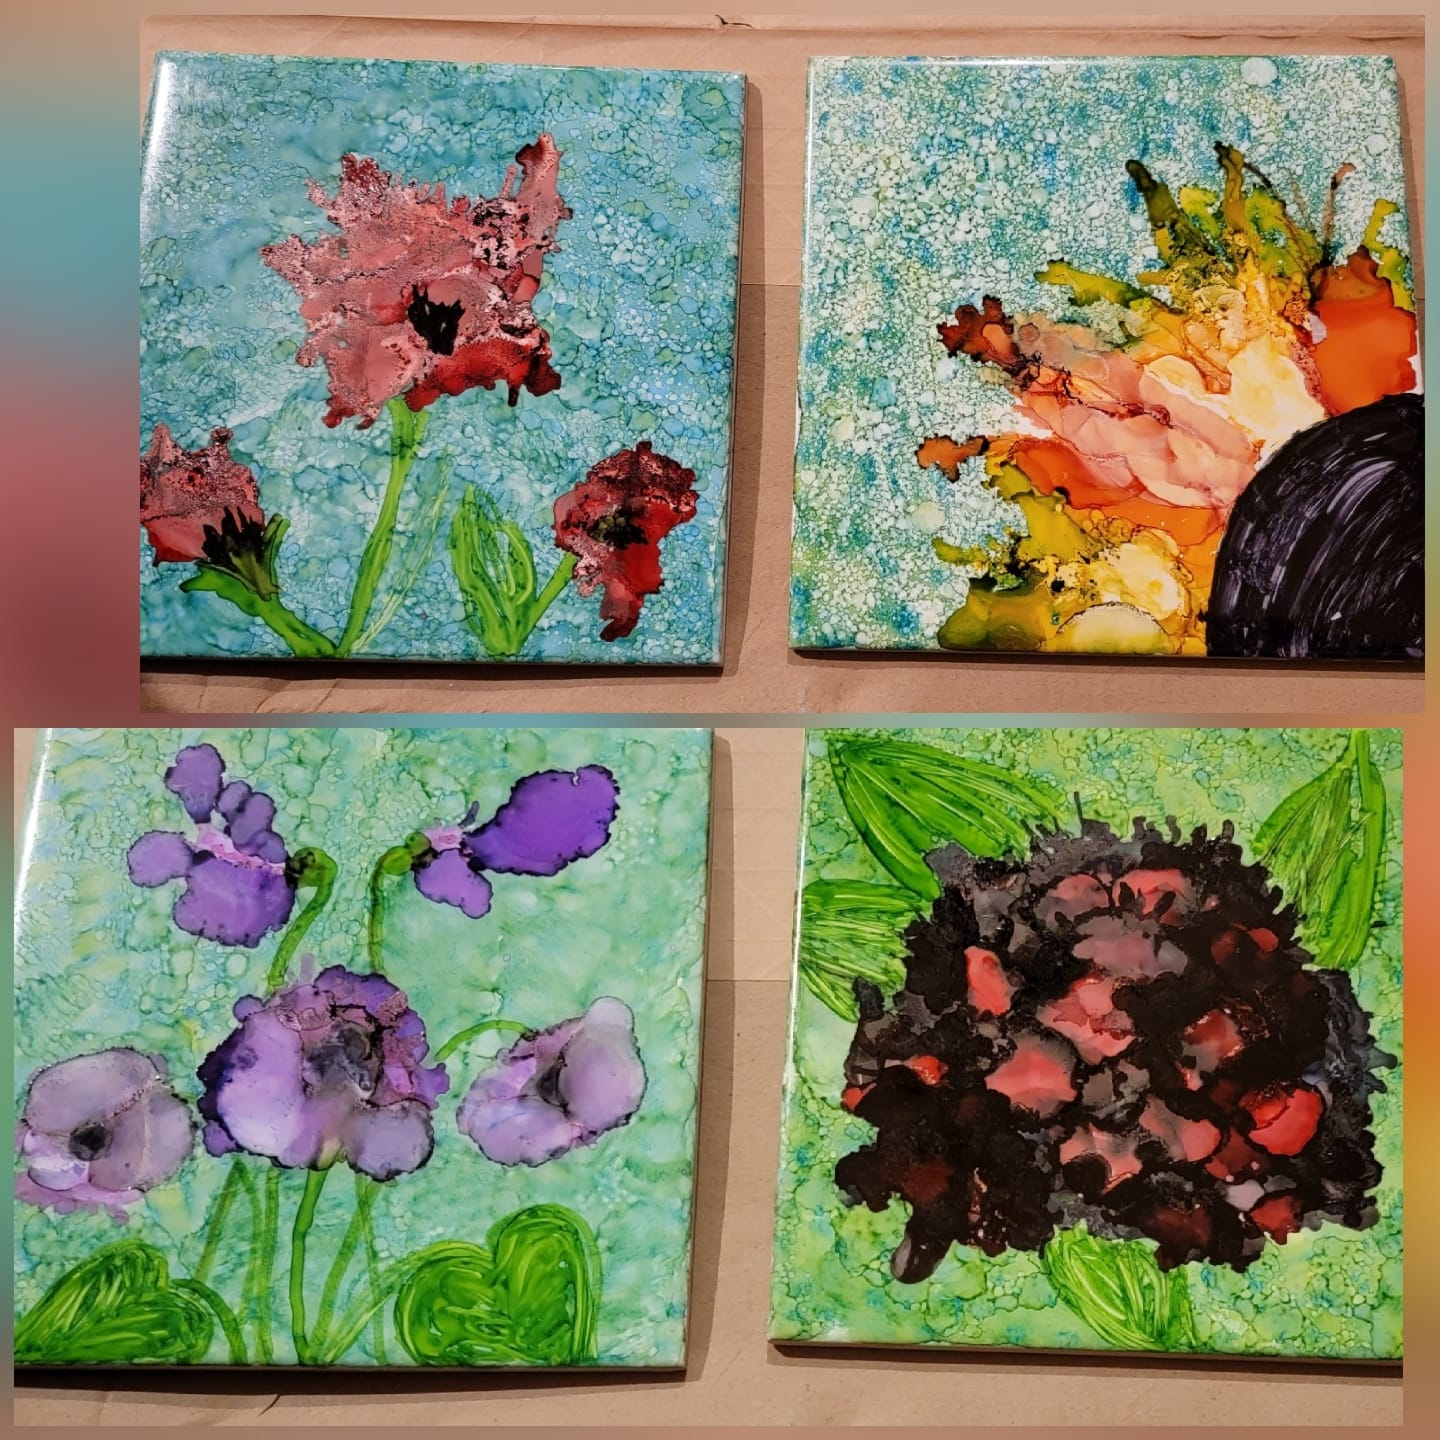 ALCOHOL INKS BLOWN FLOWERS *APRIL 30TH*12PM - Maryland Wineries Association